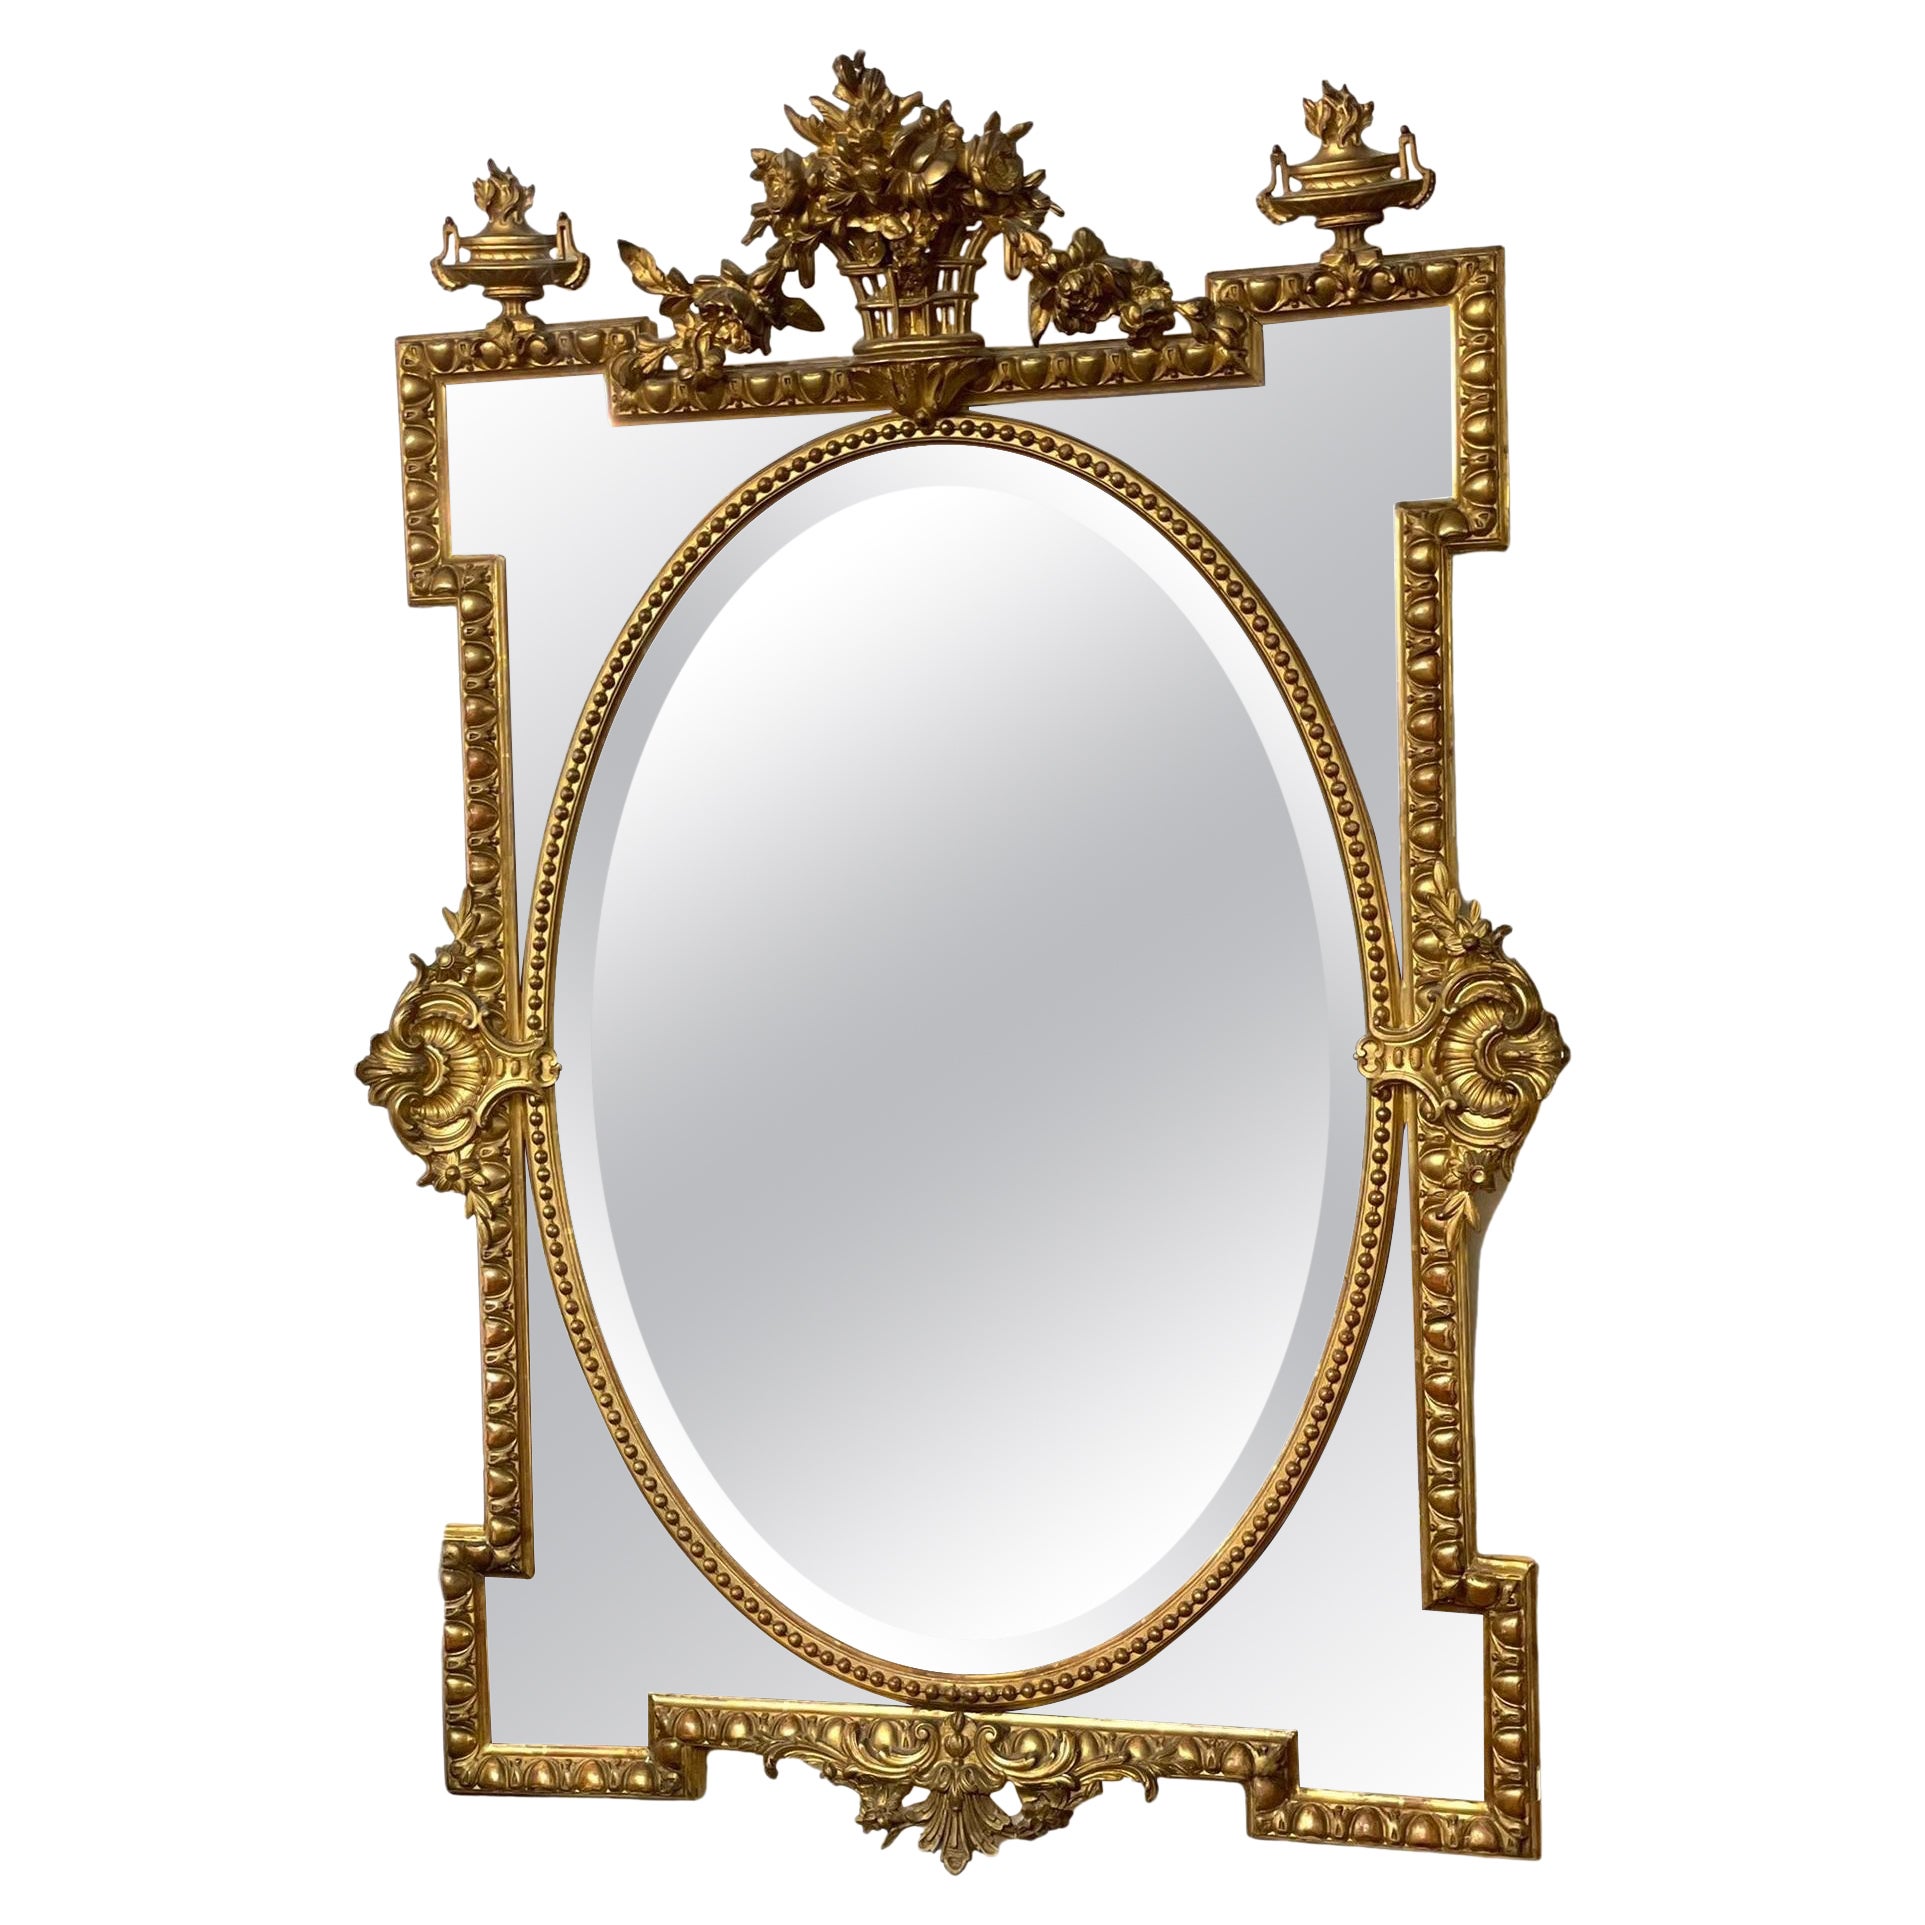 19th Century Ornate Napoleon III Gilt Parcloses Wall Mirror from France